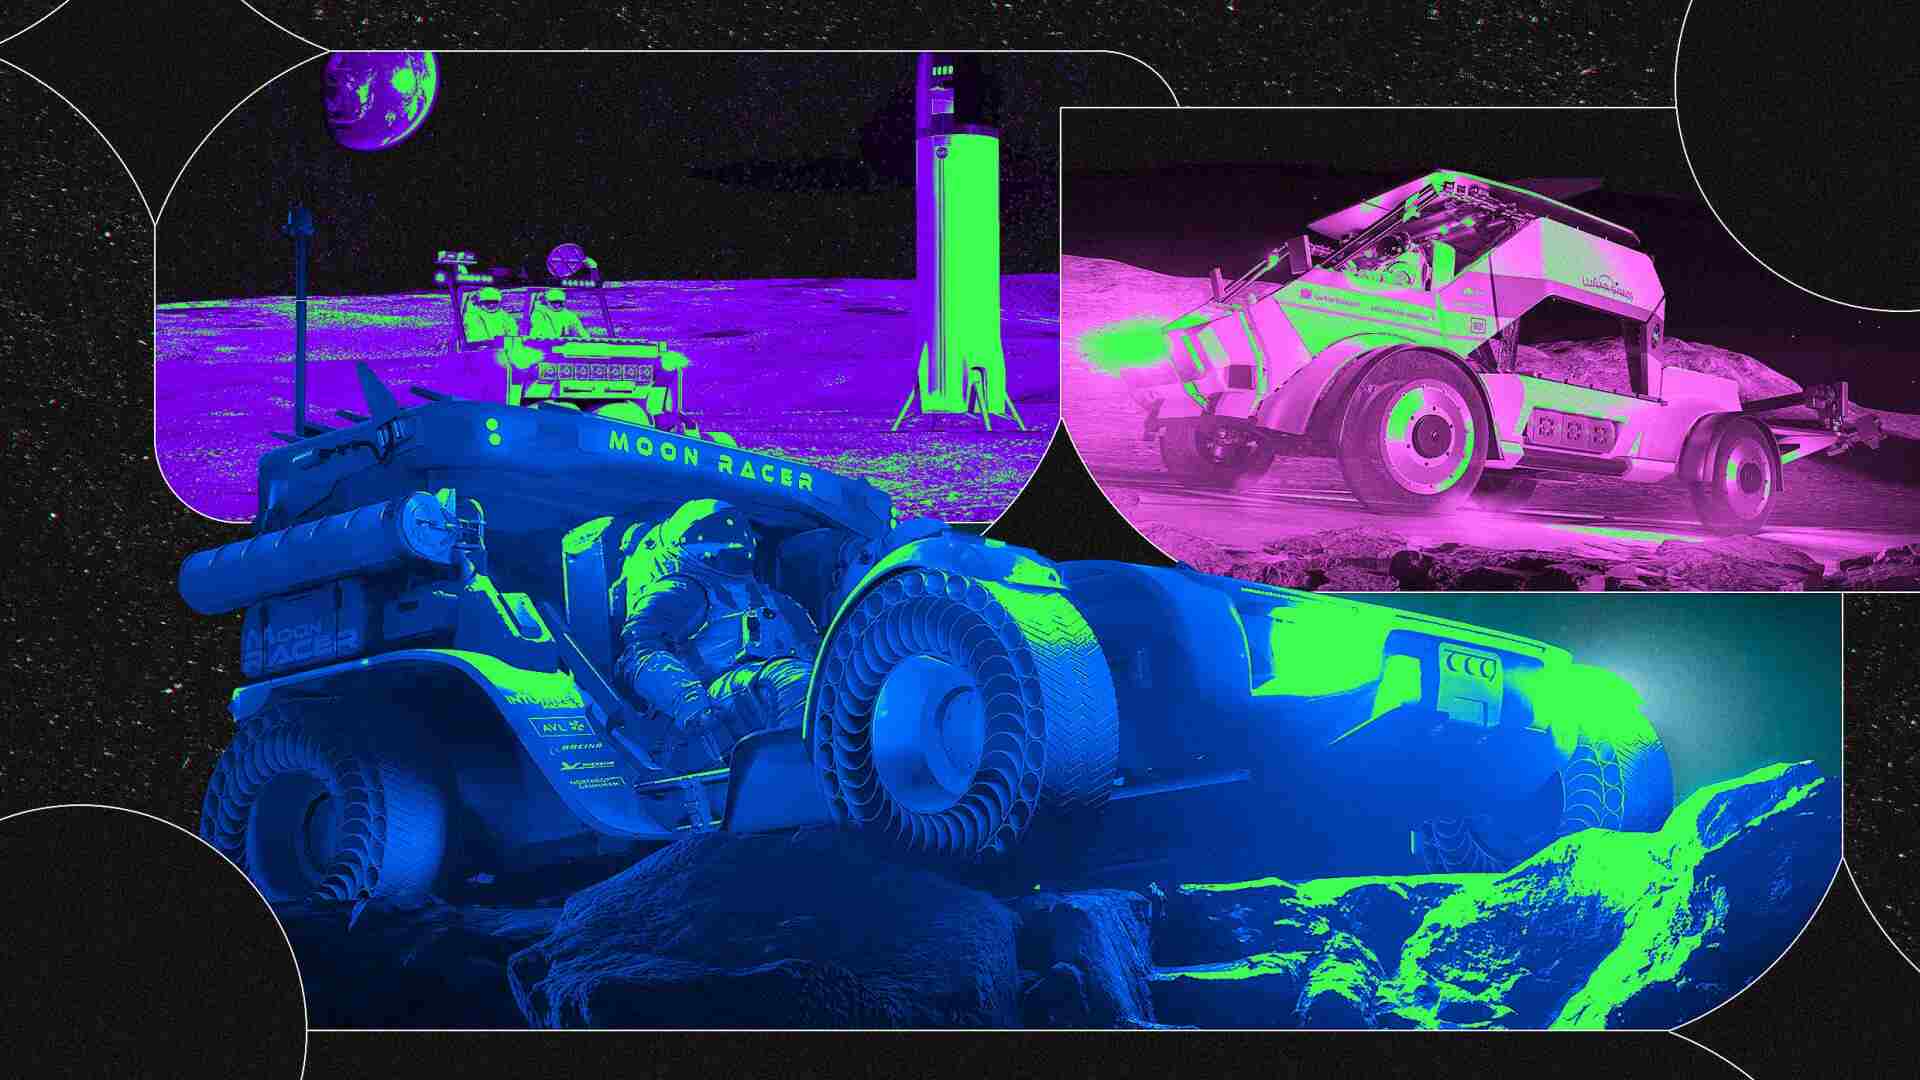 See the lunar vehicles that could someday drive on the moon